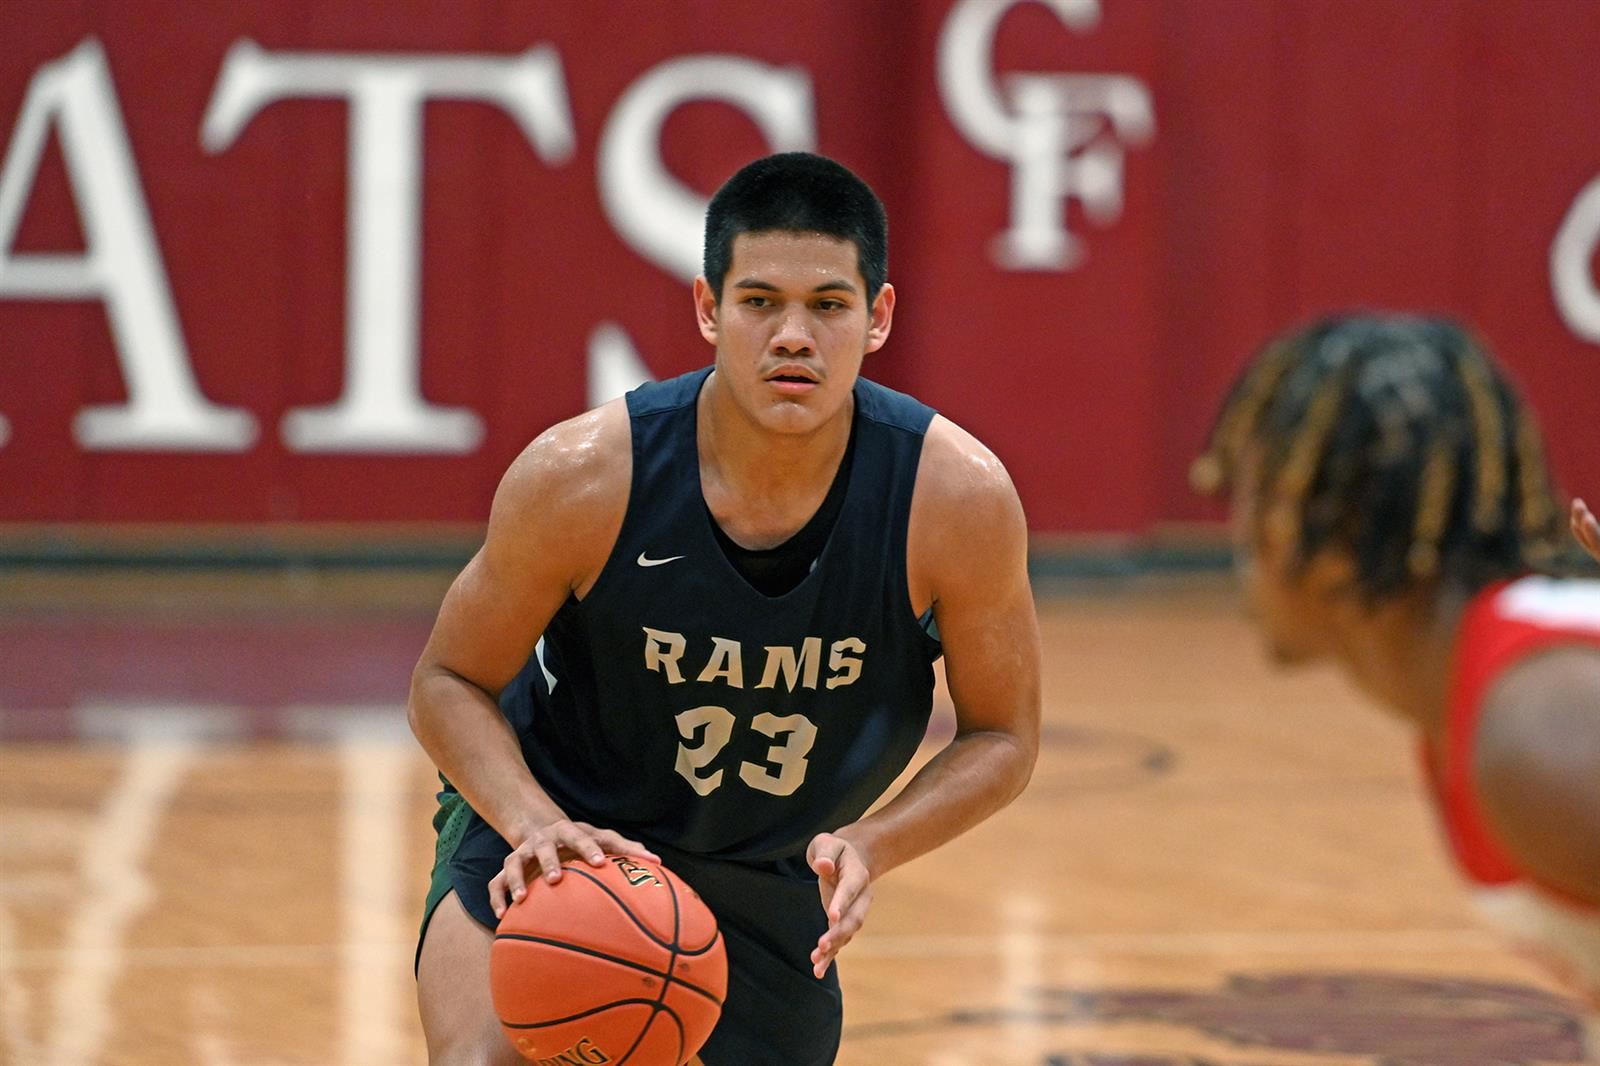 Cy Ridge High School Emiliano Soldevilla was among four Rams to earn honors on the All-District 17-6A boys’ basketball team.